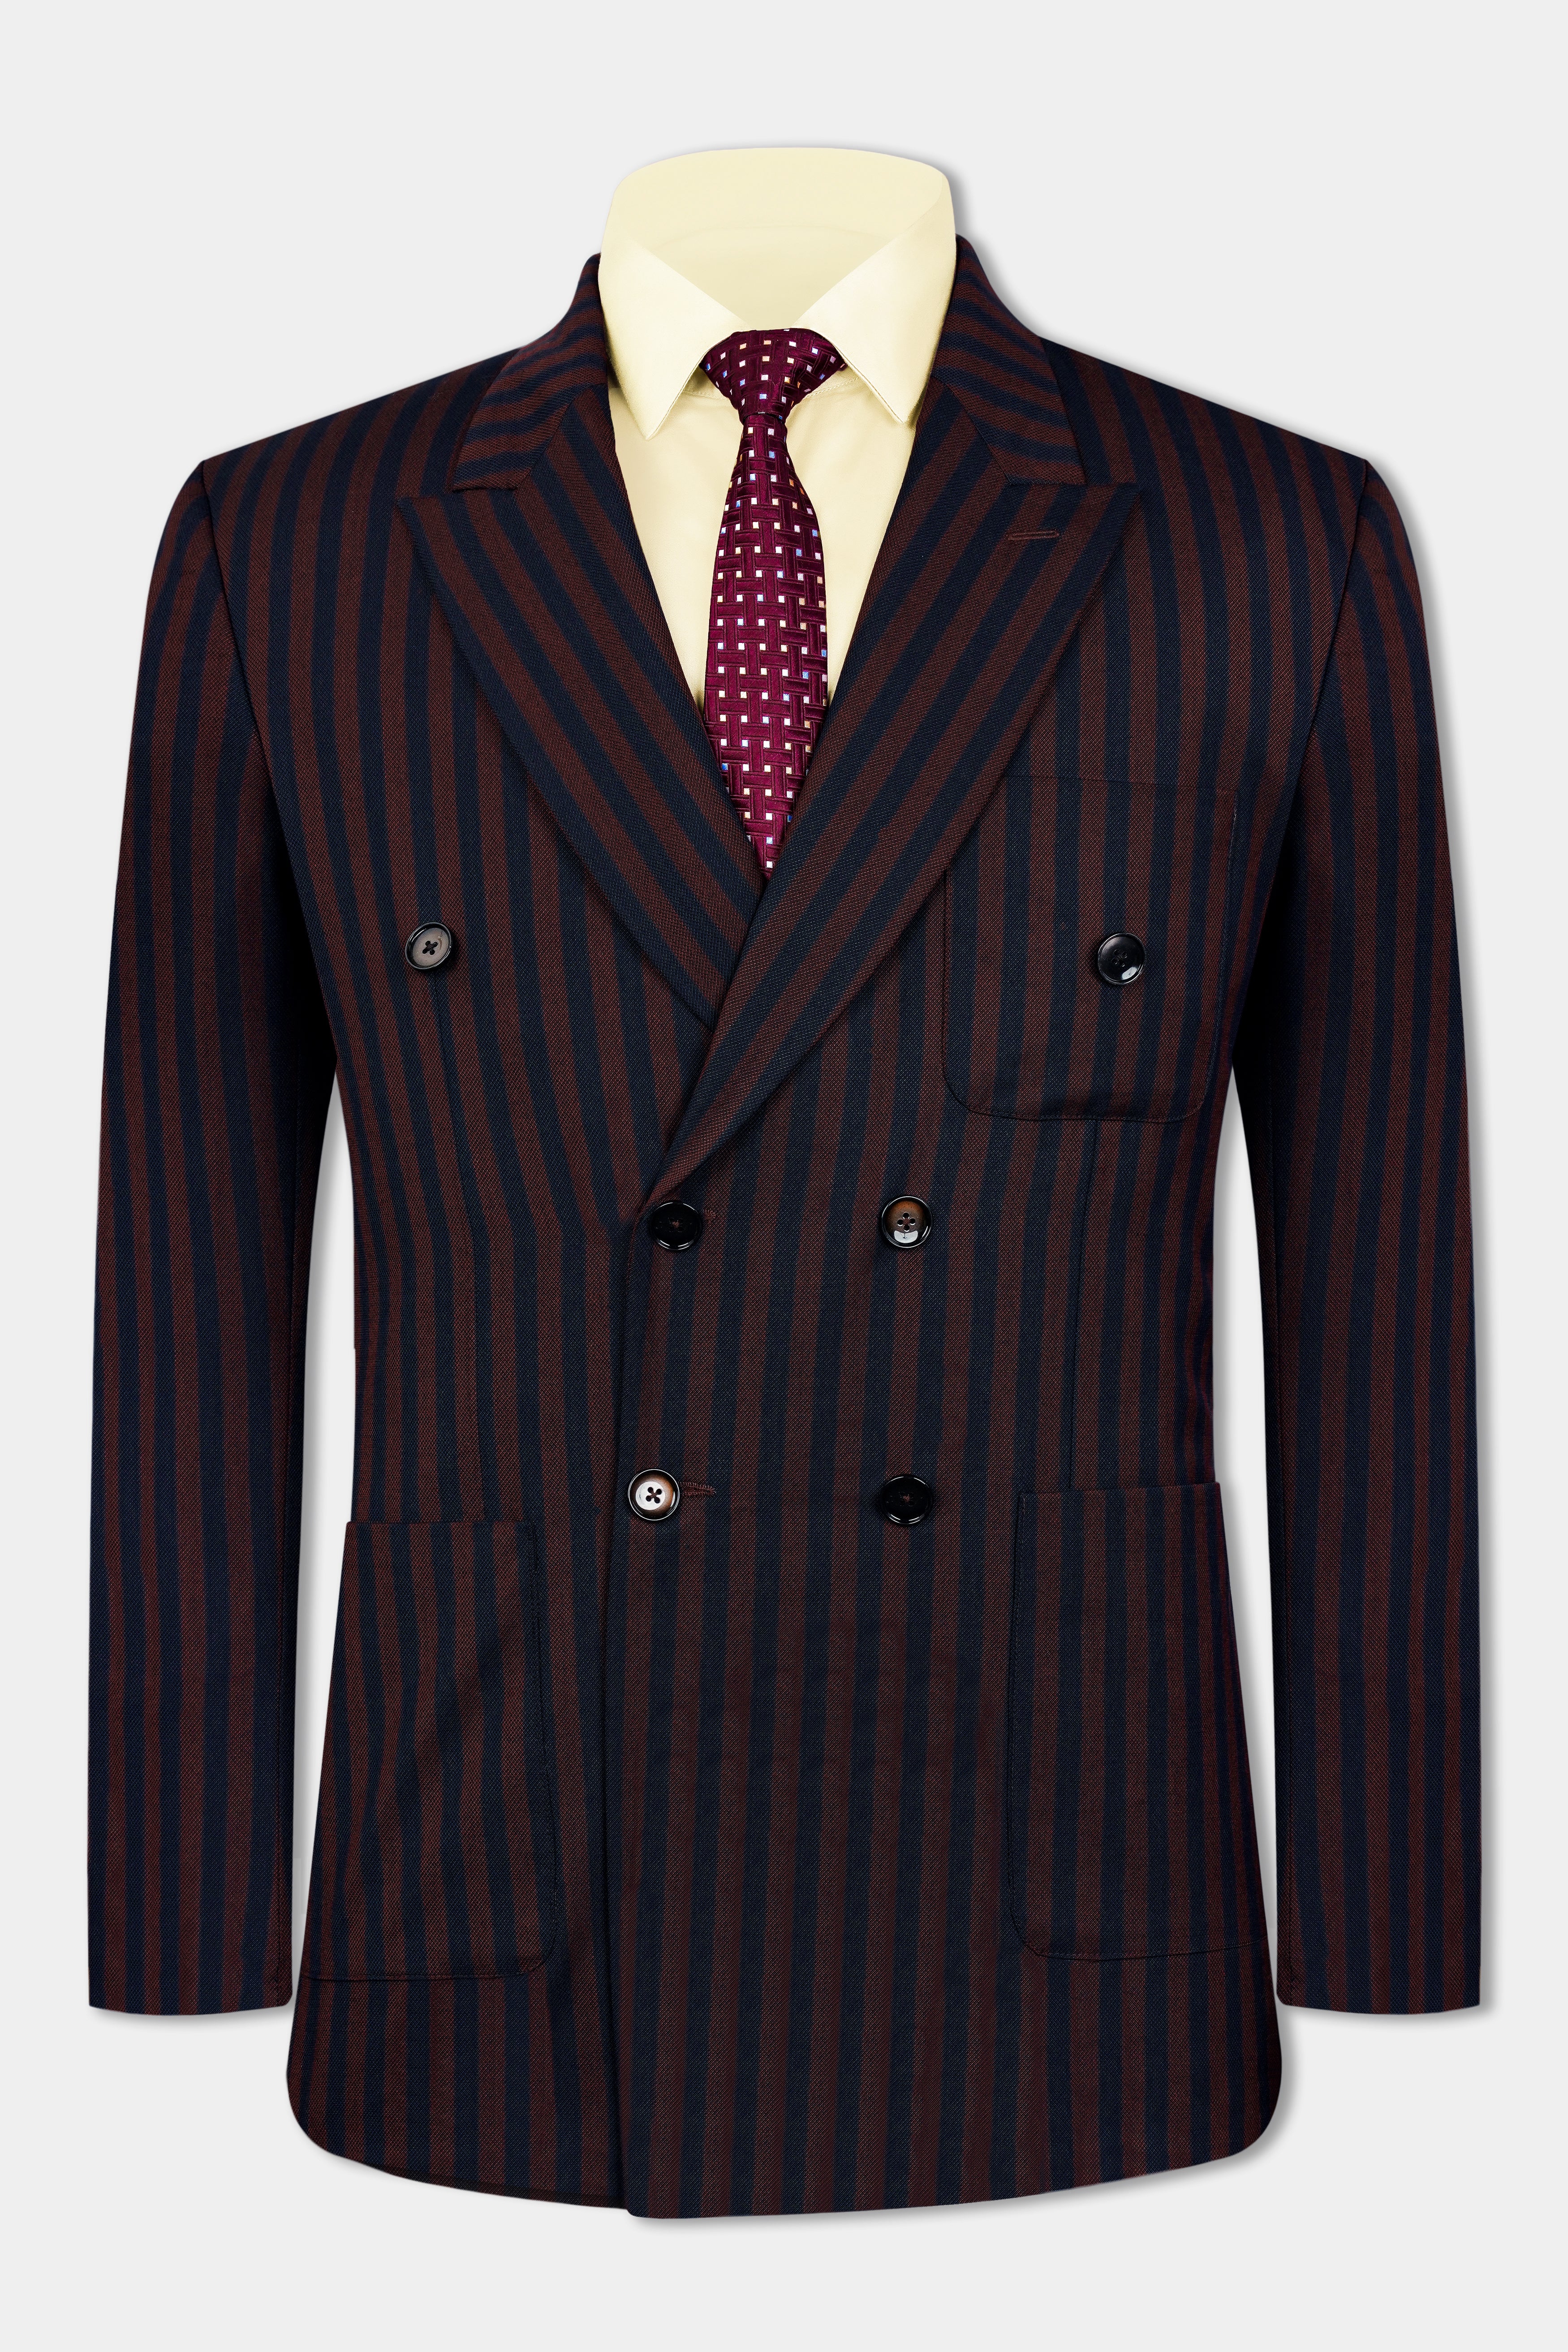 Gondola Brown and Mirage Blue Striped Wool Rich Double Breasted Sports Blazer BL3114-DB-PP-36, BL3114-DB-PP-38, BL3114-DB-PP-40, BL3114-DB-PP-42, BL3114-DB-PP-44, BL3114-DB-PP-46, BL3114-DB-PP-48, BL3114-DB-PP-50, BL3114-DB-PP-52, BL3114-DB-PP-54, BL3114-DB-PP-56, BL3114-DB-PP-58, BL3114-DB-PP-60